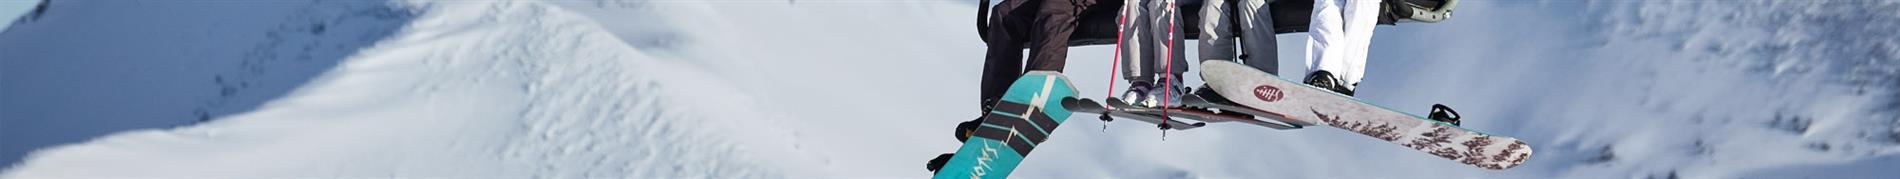 Burton Women's skis, snowboards, and accessories for everything snow. 